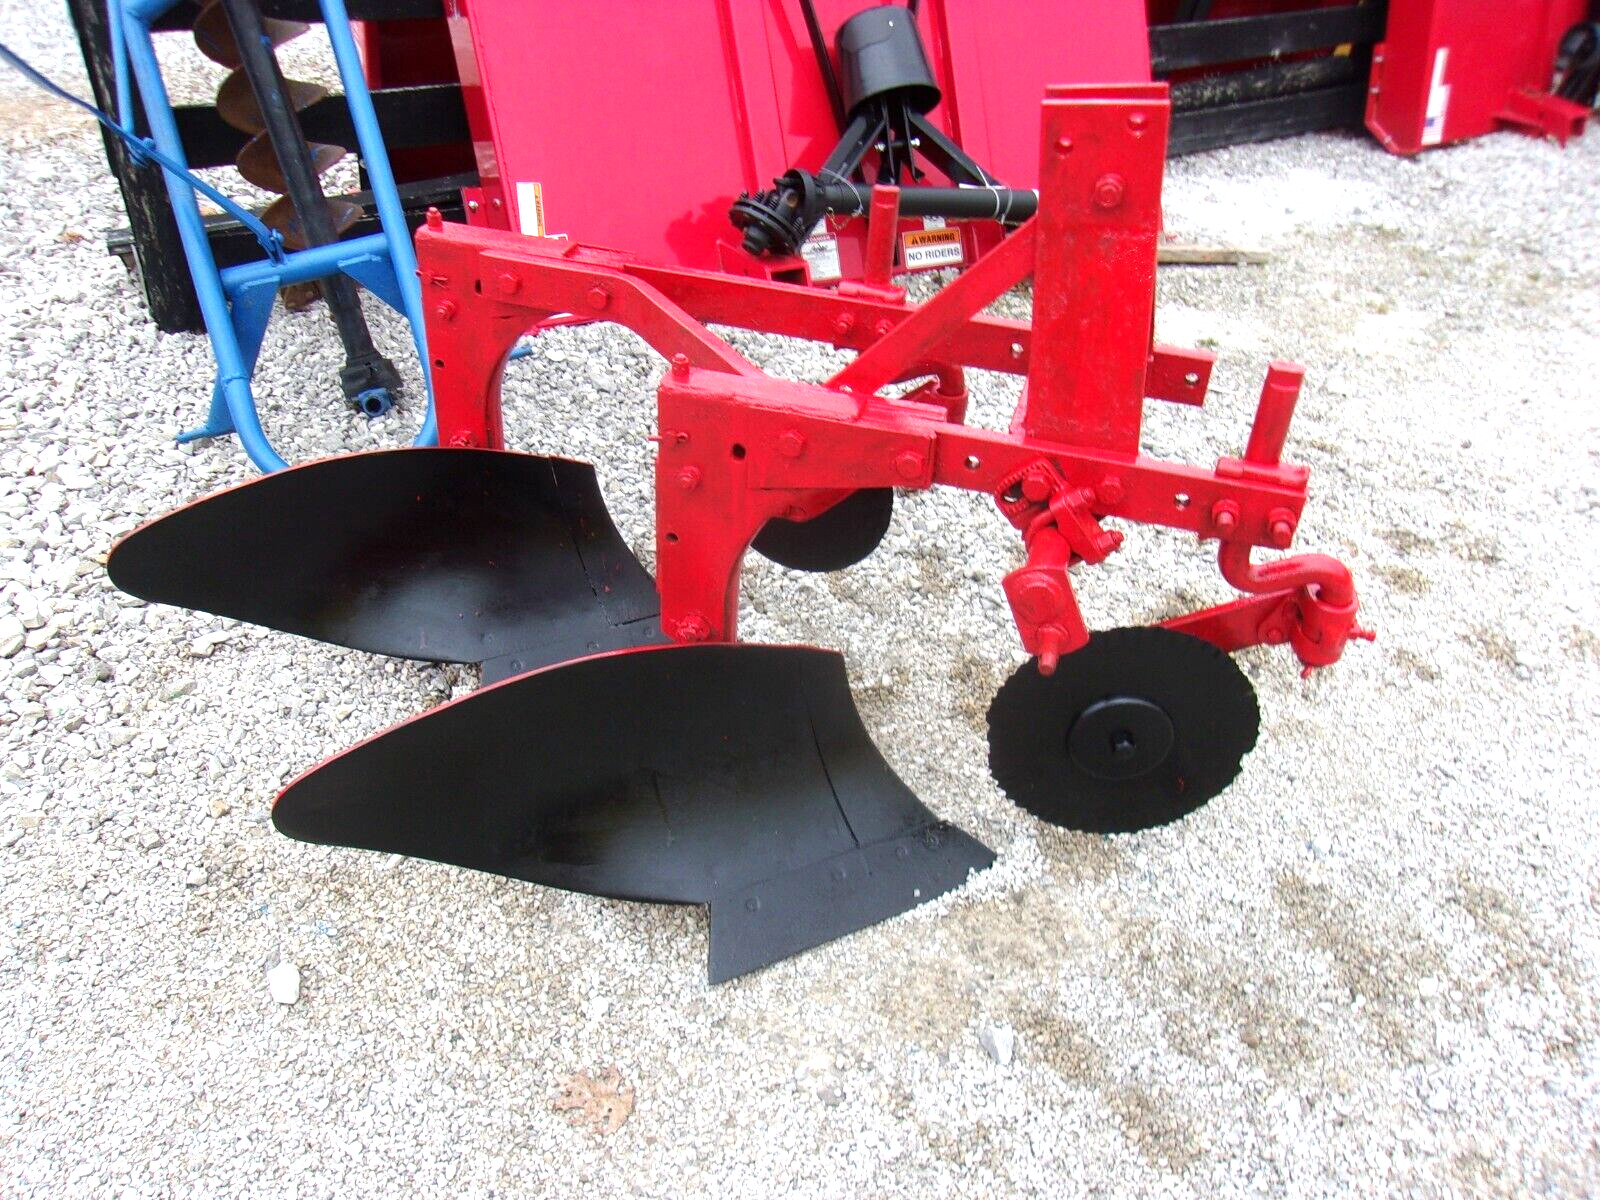 Used 2-14" Ih Trip Type Plow----3 Pt. Free 1000 Mile Delivery From Ky